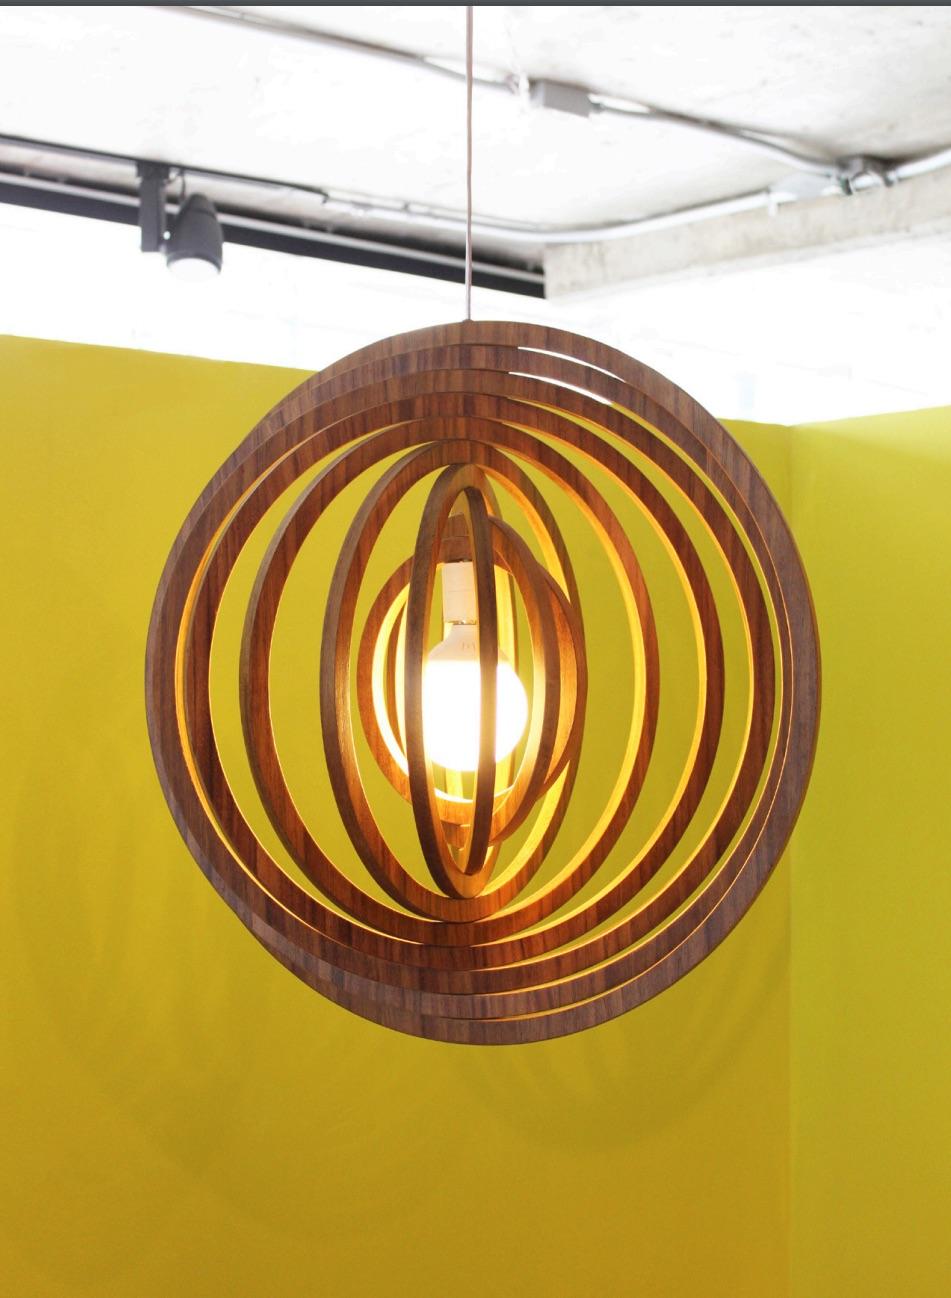 Contemporary Engiro Ceiling Light, Maria Beckmann, Represented by Tuleste Factory